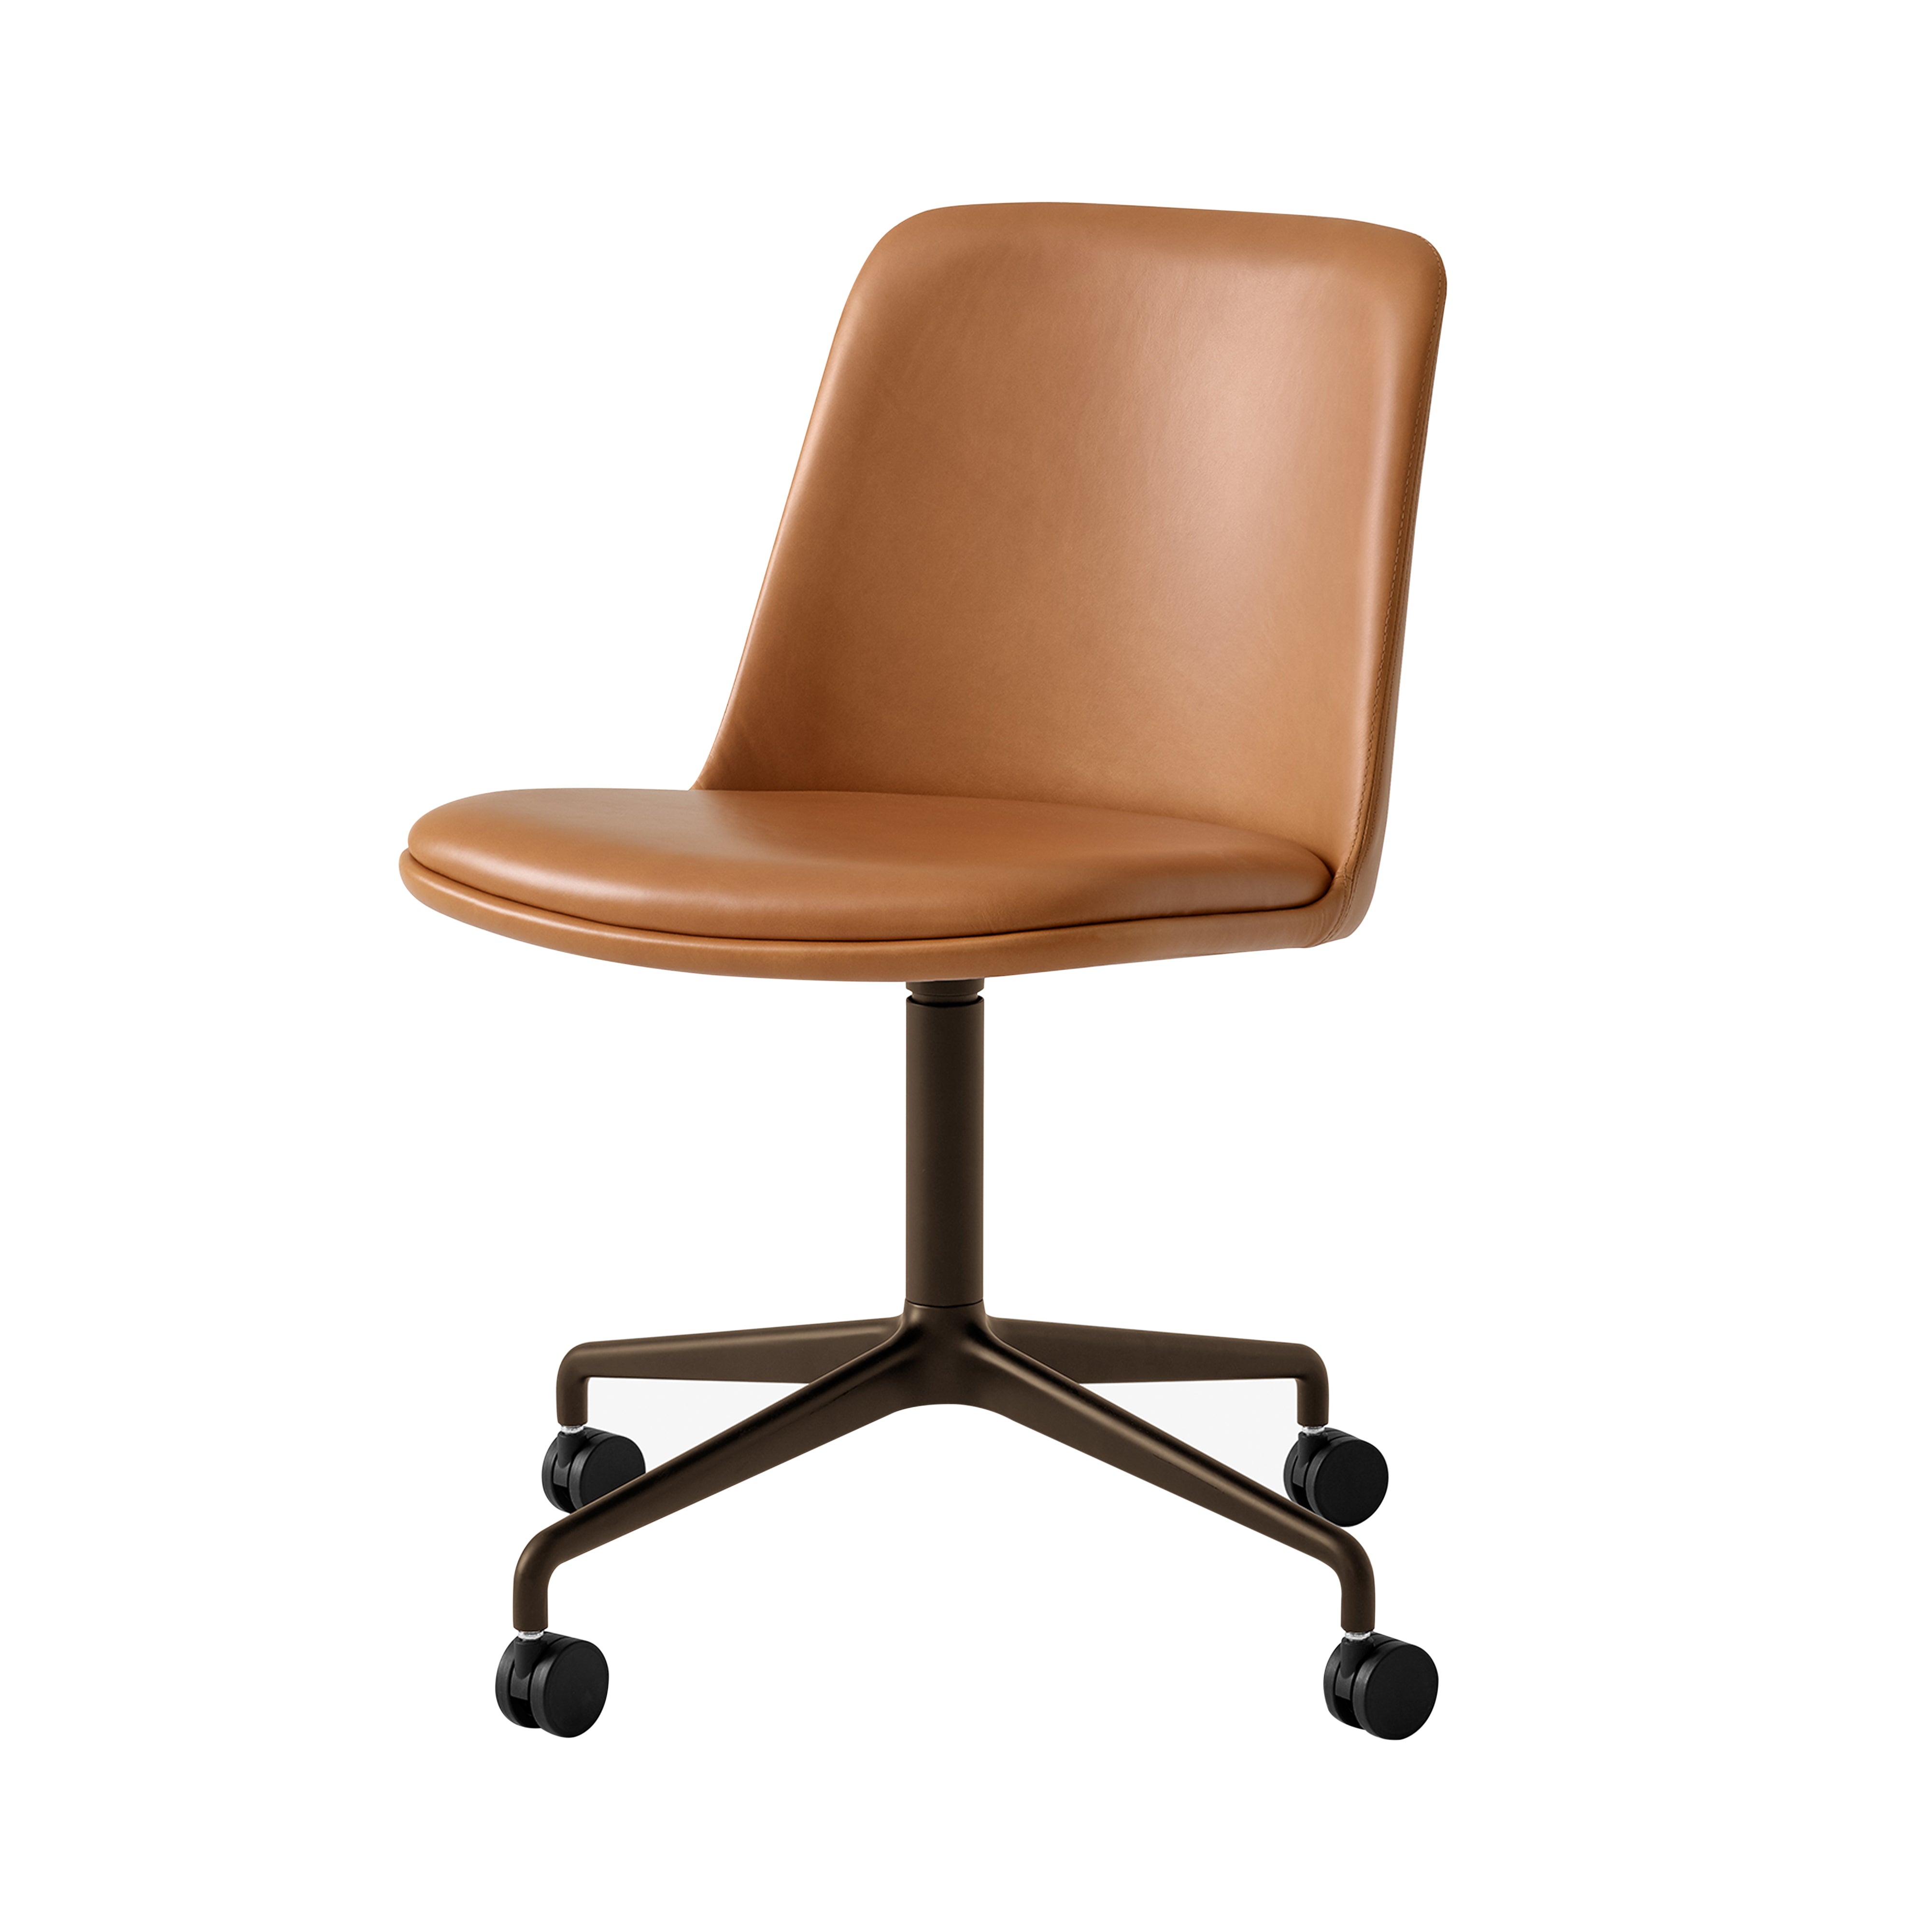 Rely Chair HW24: Bronzed